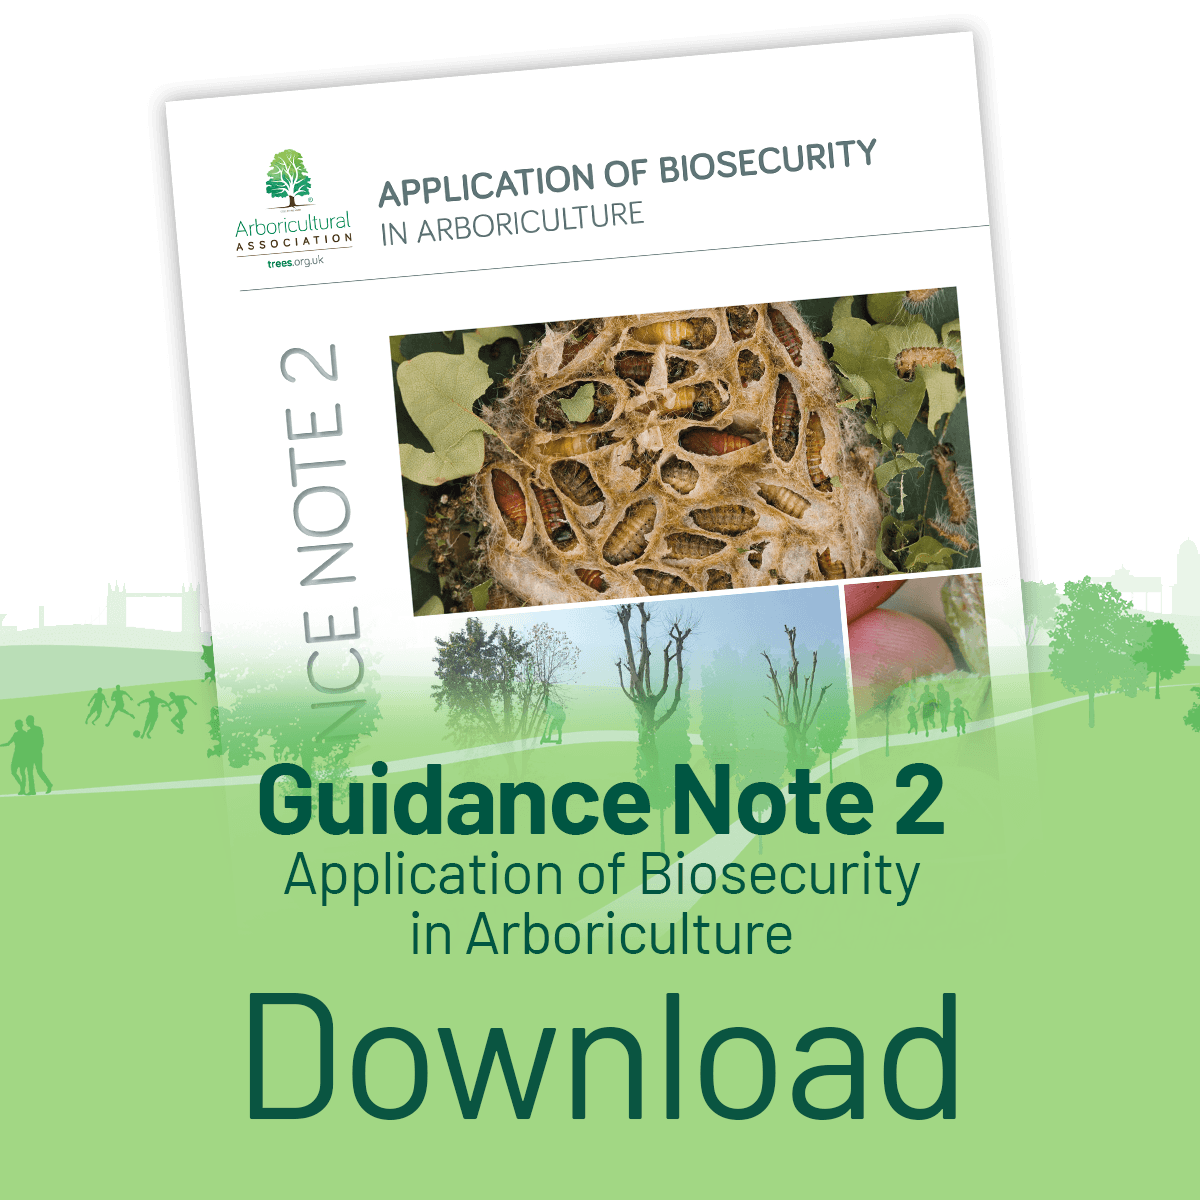 Guidance Note 2 – Application of Biosecurity in Arboriculture